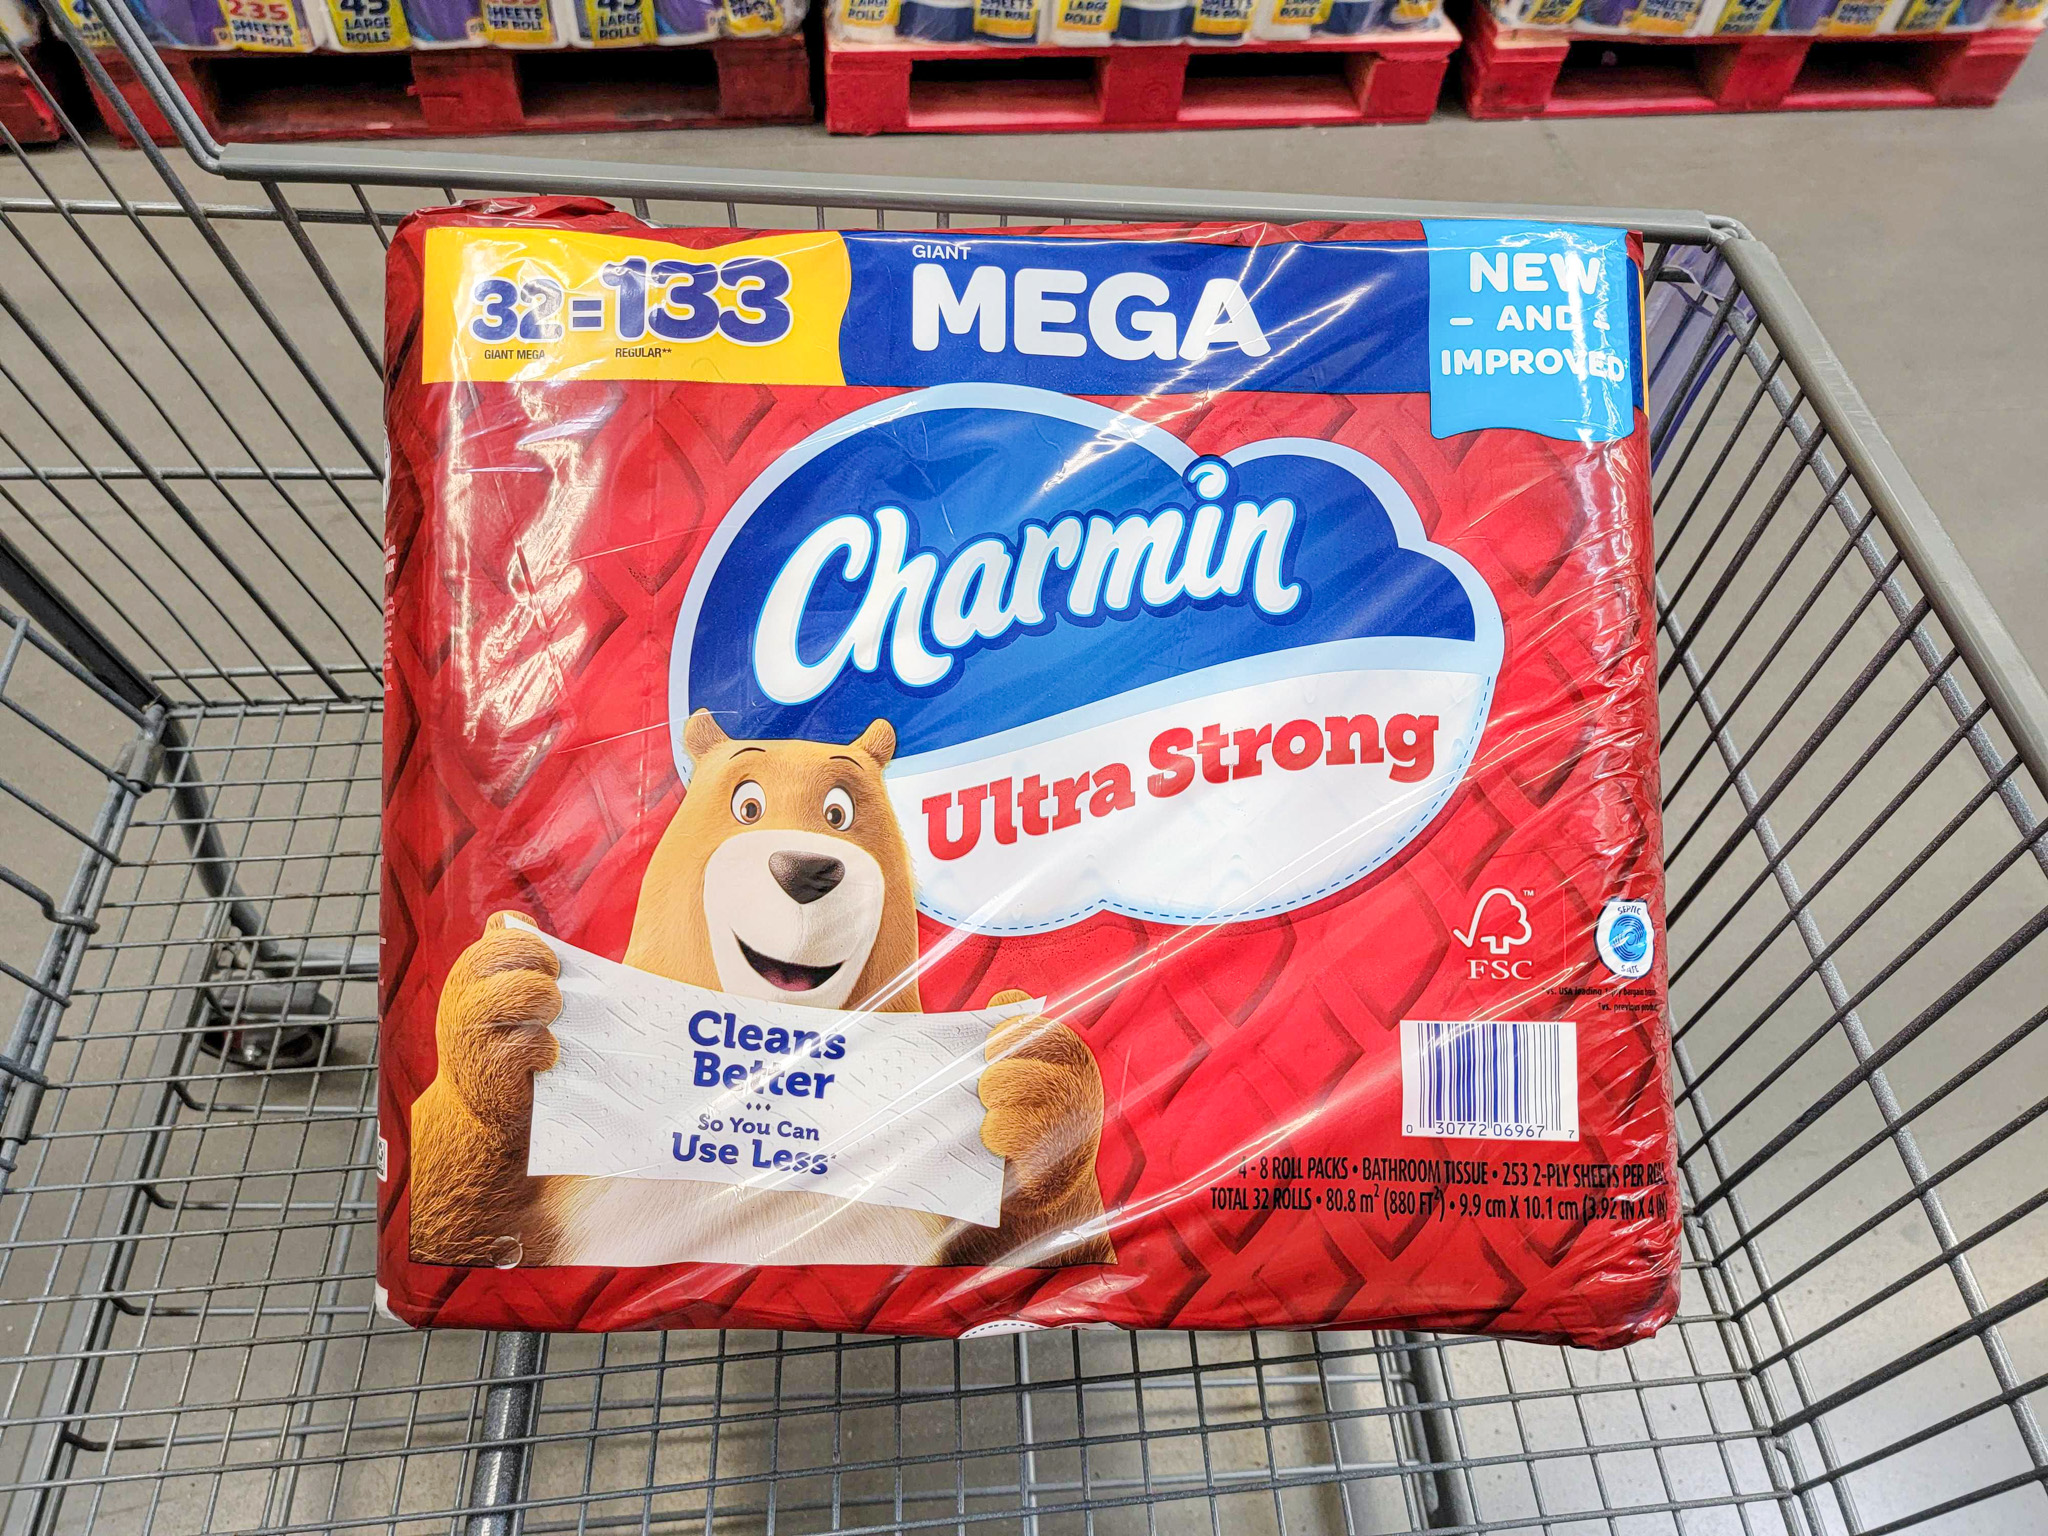 Charmin Coupons - The Krazy Coupon Lady